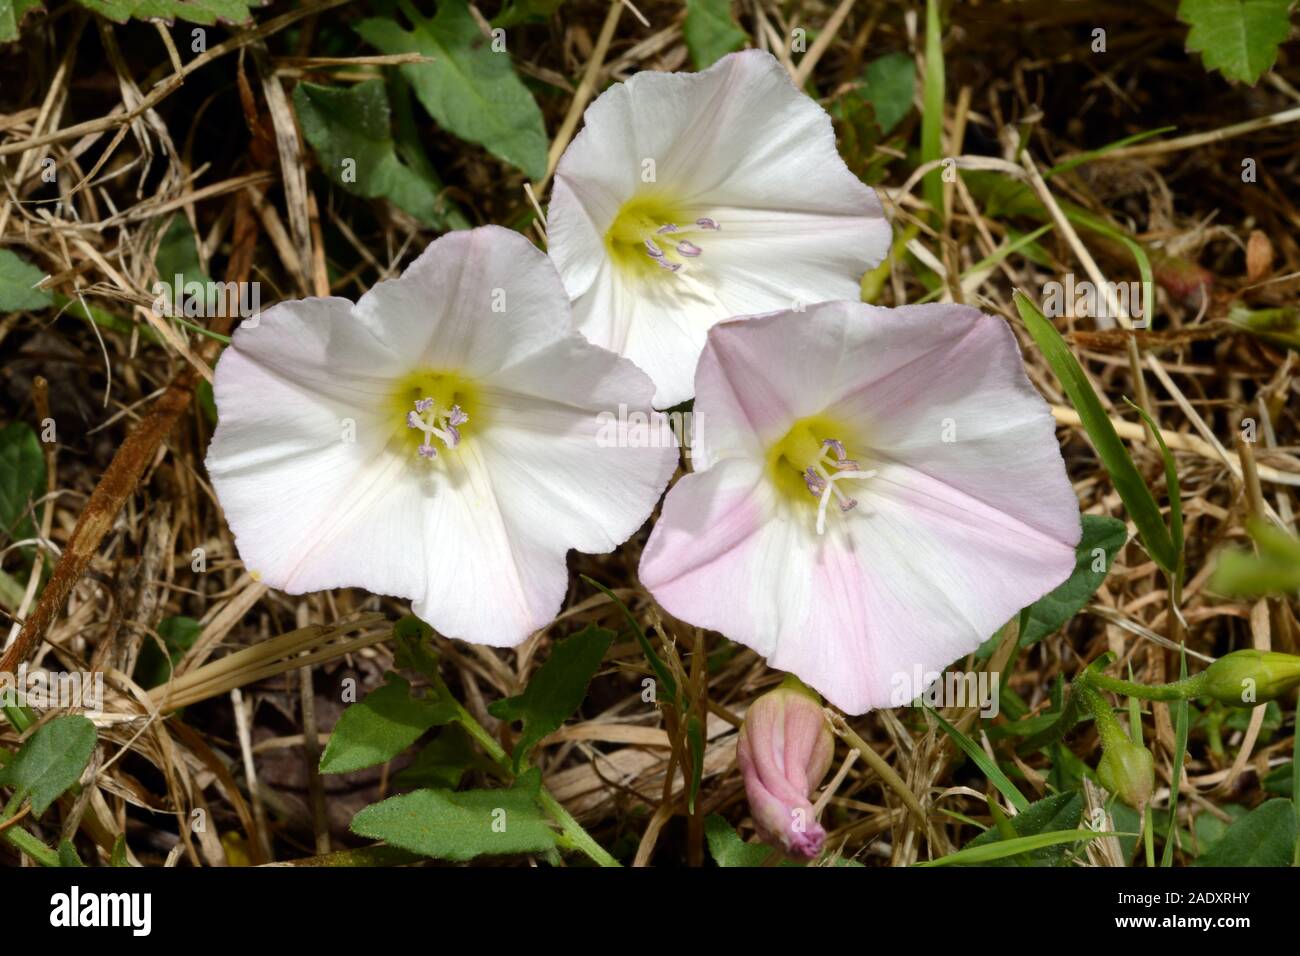 Convolvulus arvensis (field bindweed) is native to Europe and Asia.  It is a climbing or creeping herbaceous perennial. Stock Photo